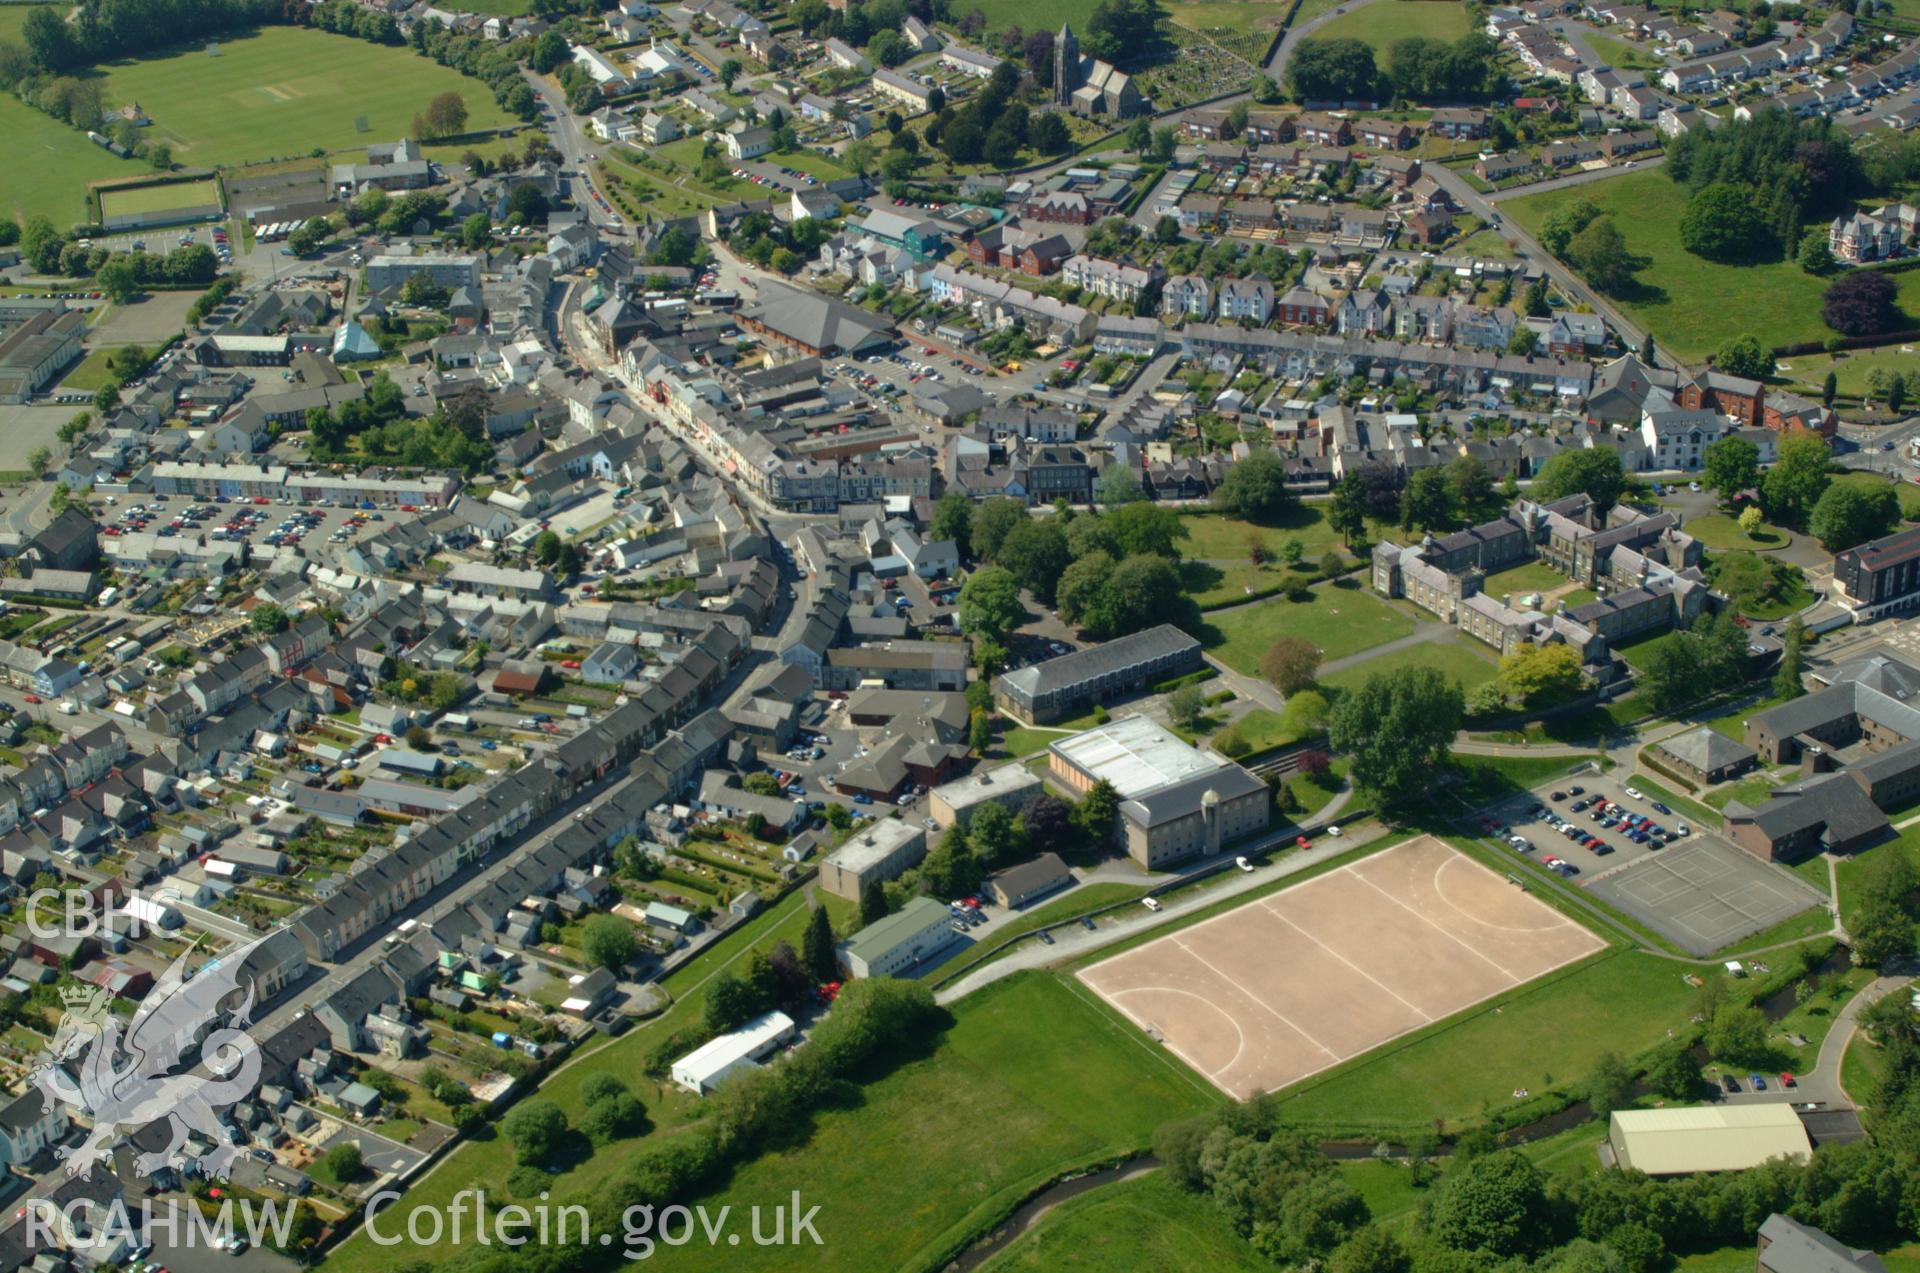 RCAHMW colour oblique aerial photograph of Lampeter taken on 24/05/2004 by Toby Driver